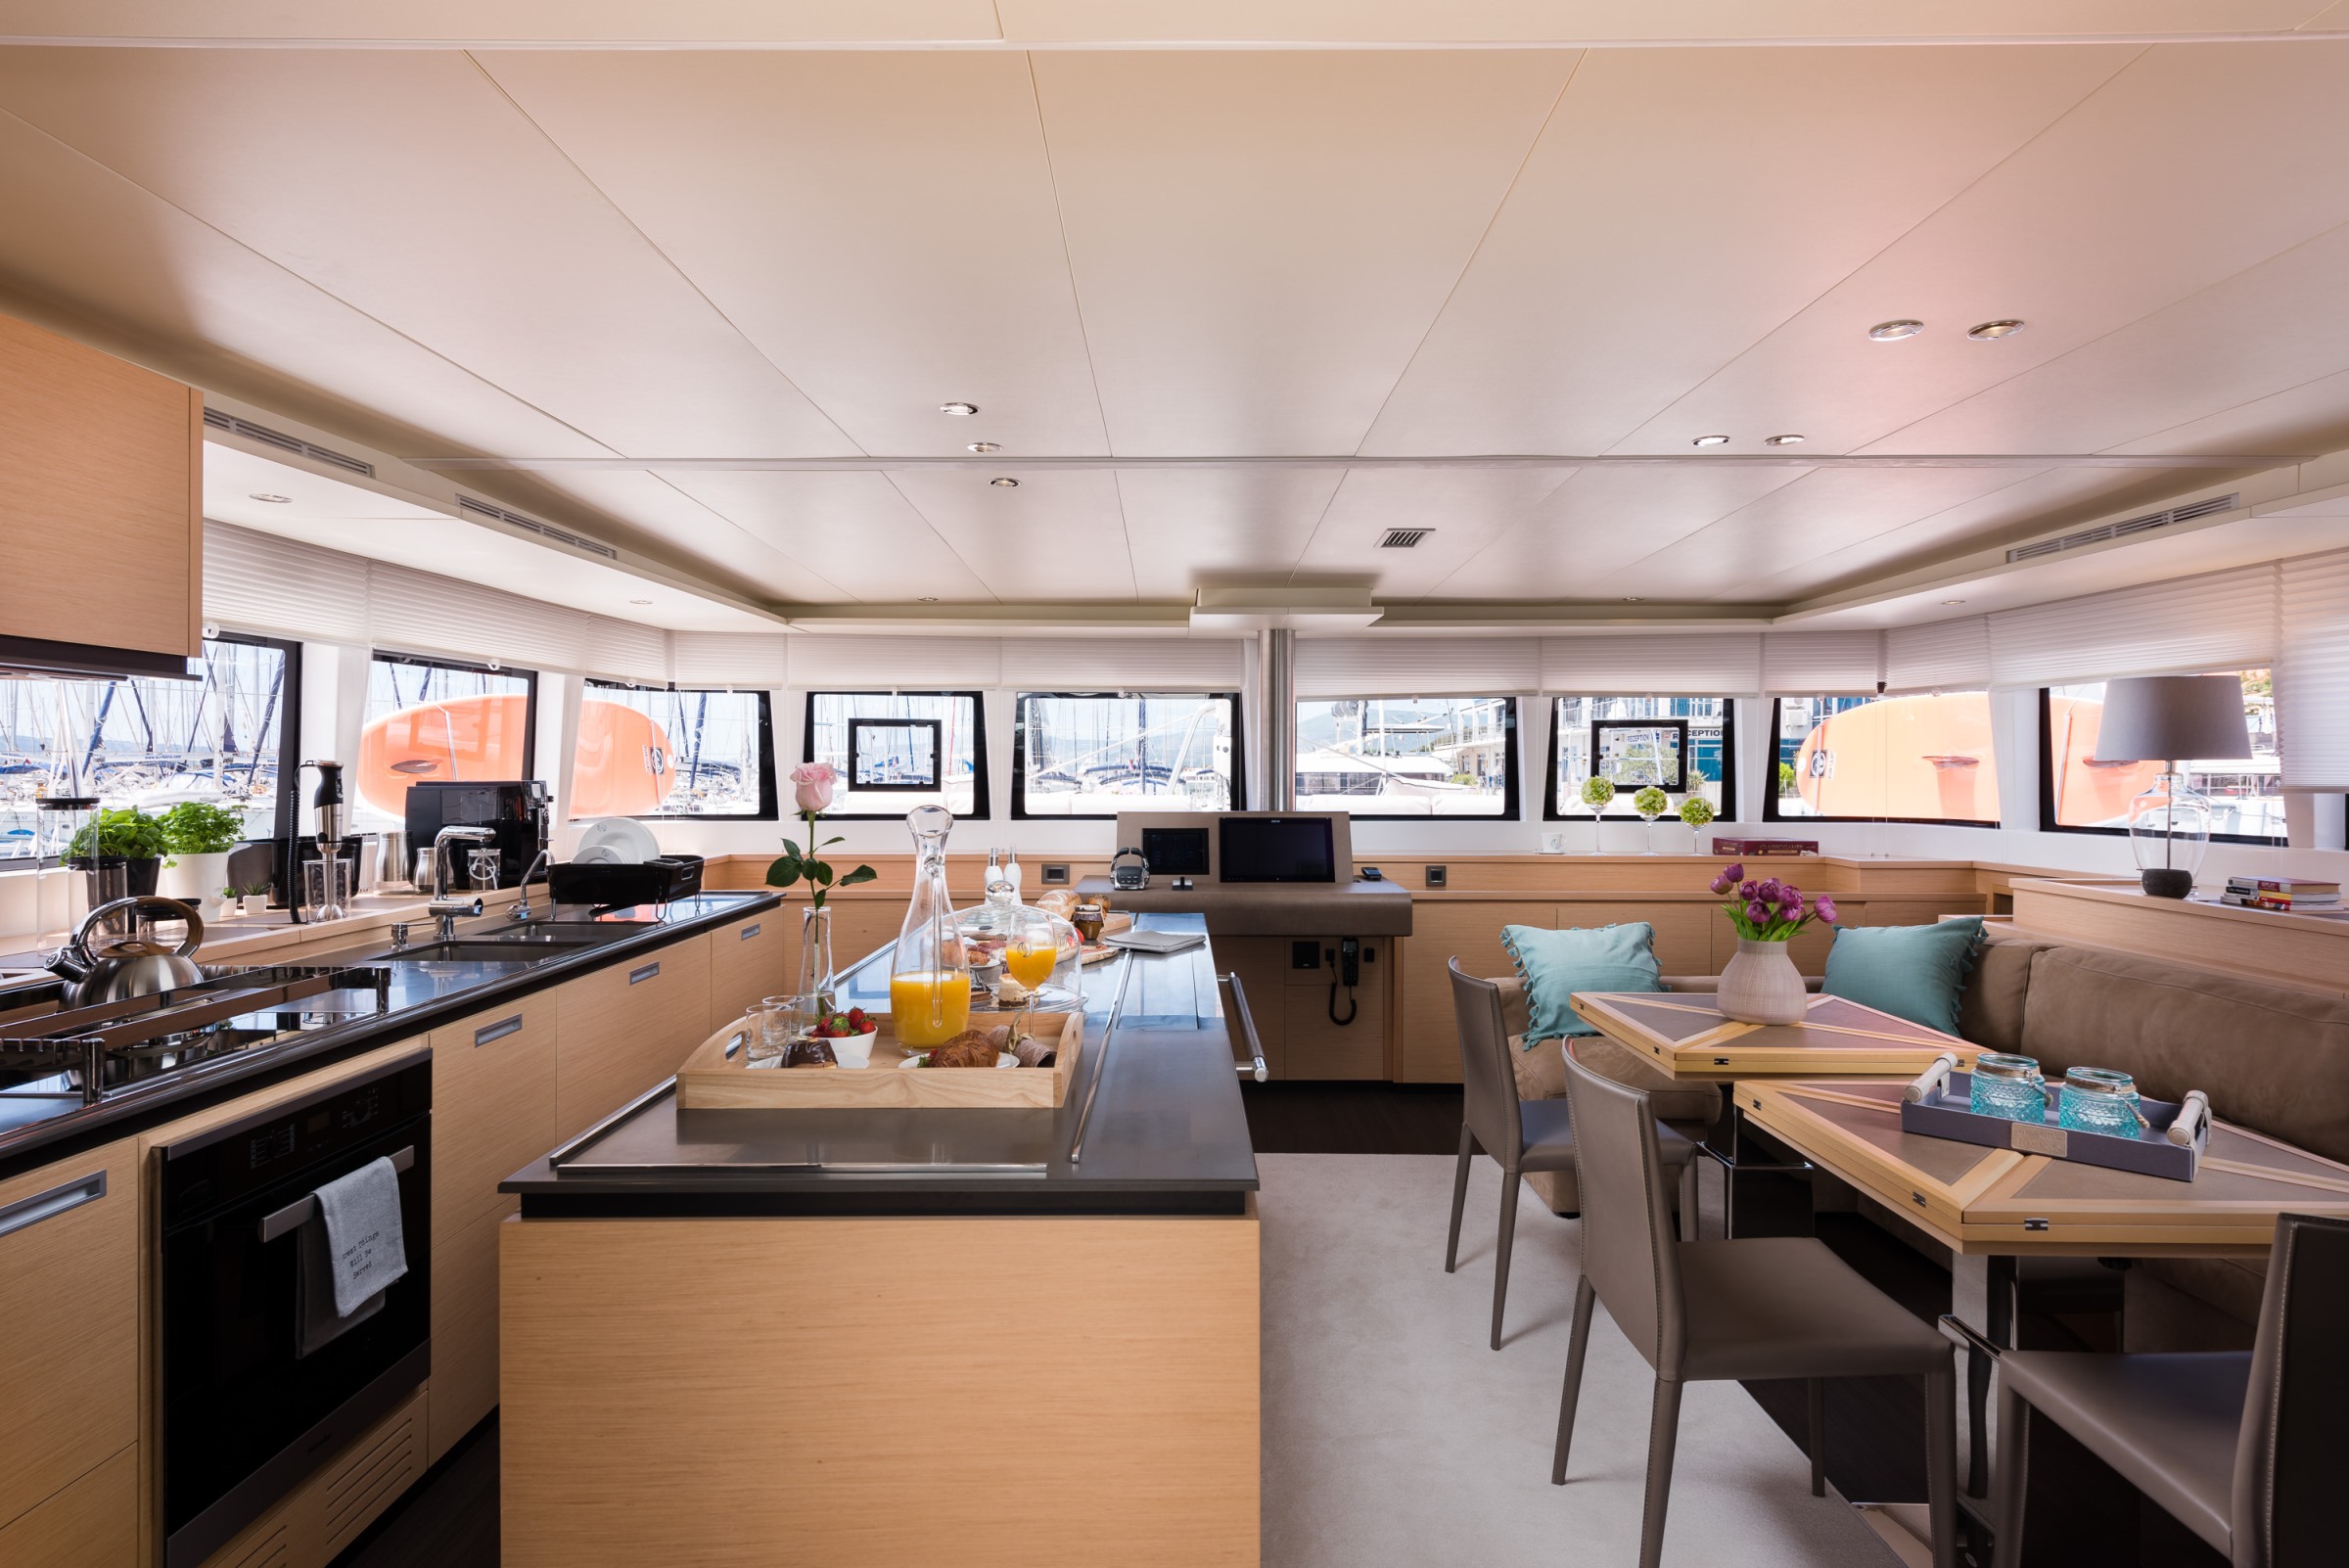 Lagoon 620 OPAL - Salon with galley